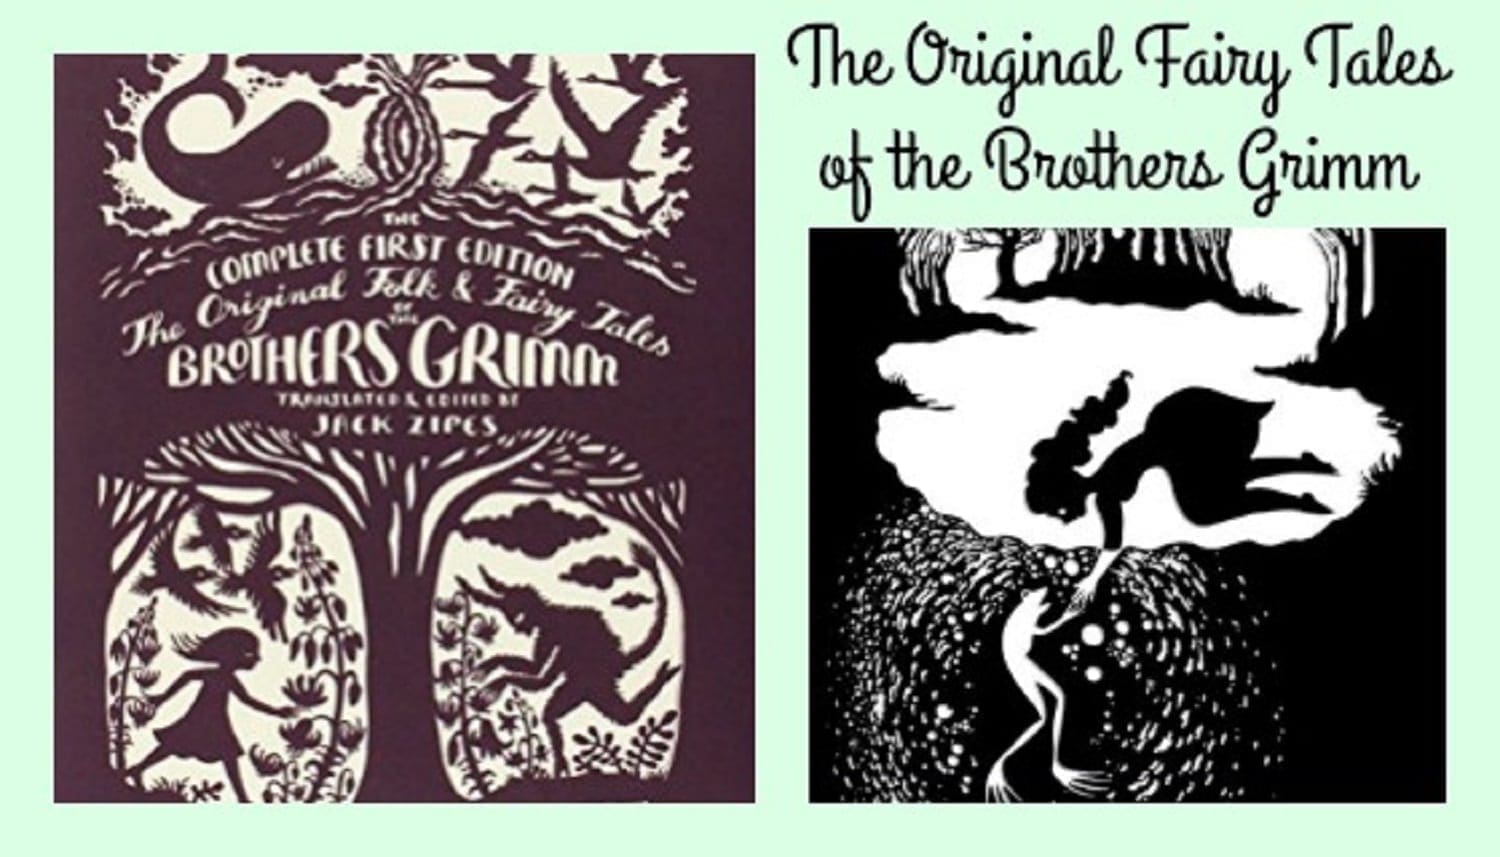 The Original Fairy Tales of the Brothers Grimm: The Complete First Edition review